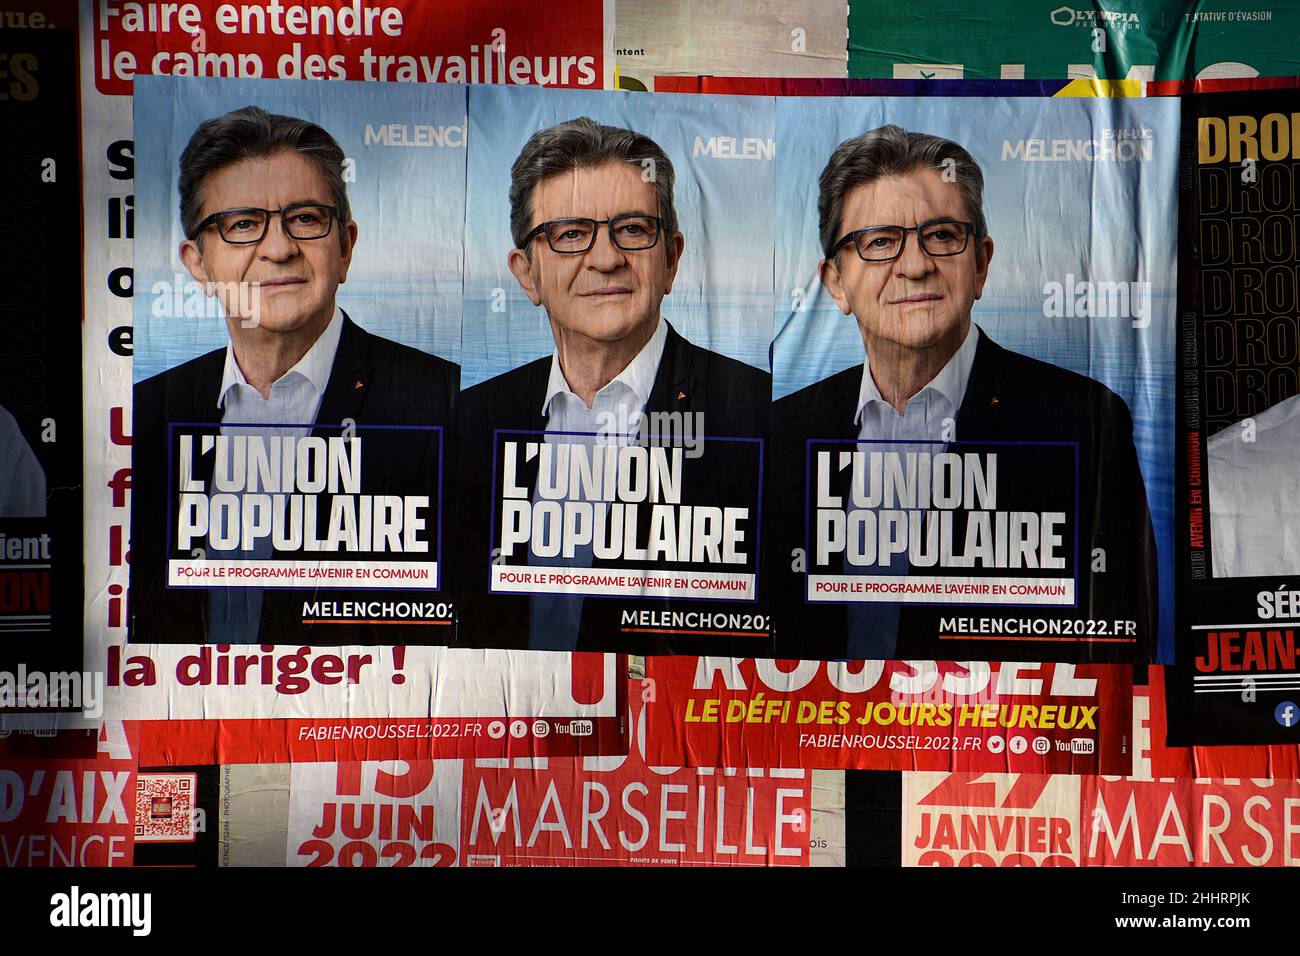 Marseille, France. 25th Jan, 2022. Posters of Jean-Luc Mélenchon are seen on display.Posters campaign of Nathalie Arthaud, Fabien Roussel, Philippe Poutou and Jean-Luc Mélenchon, candidates for the French presidential elections of 2022. (Photo by Gerard Bottino/SOPA Images/Sipa USA) Credit: Sipa USA/Alamy Live News Stock Photo